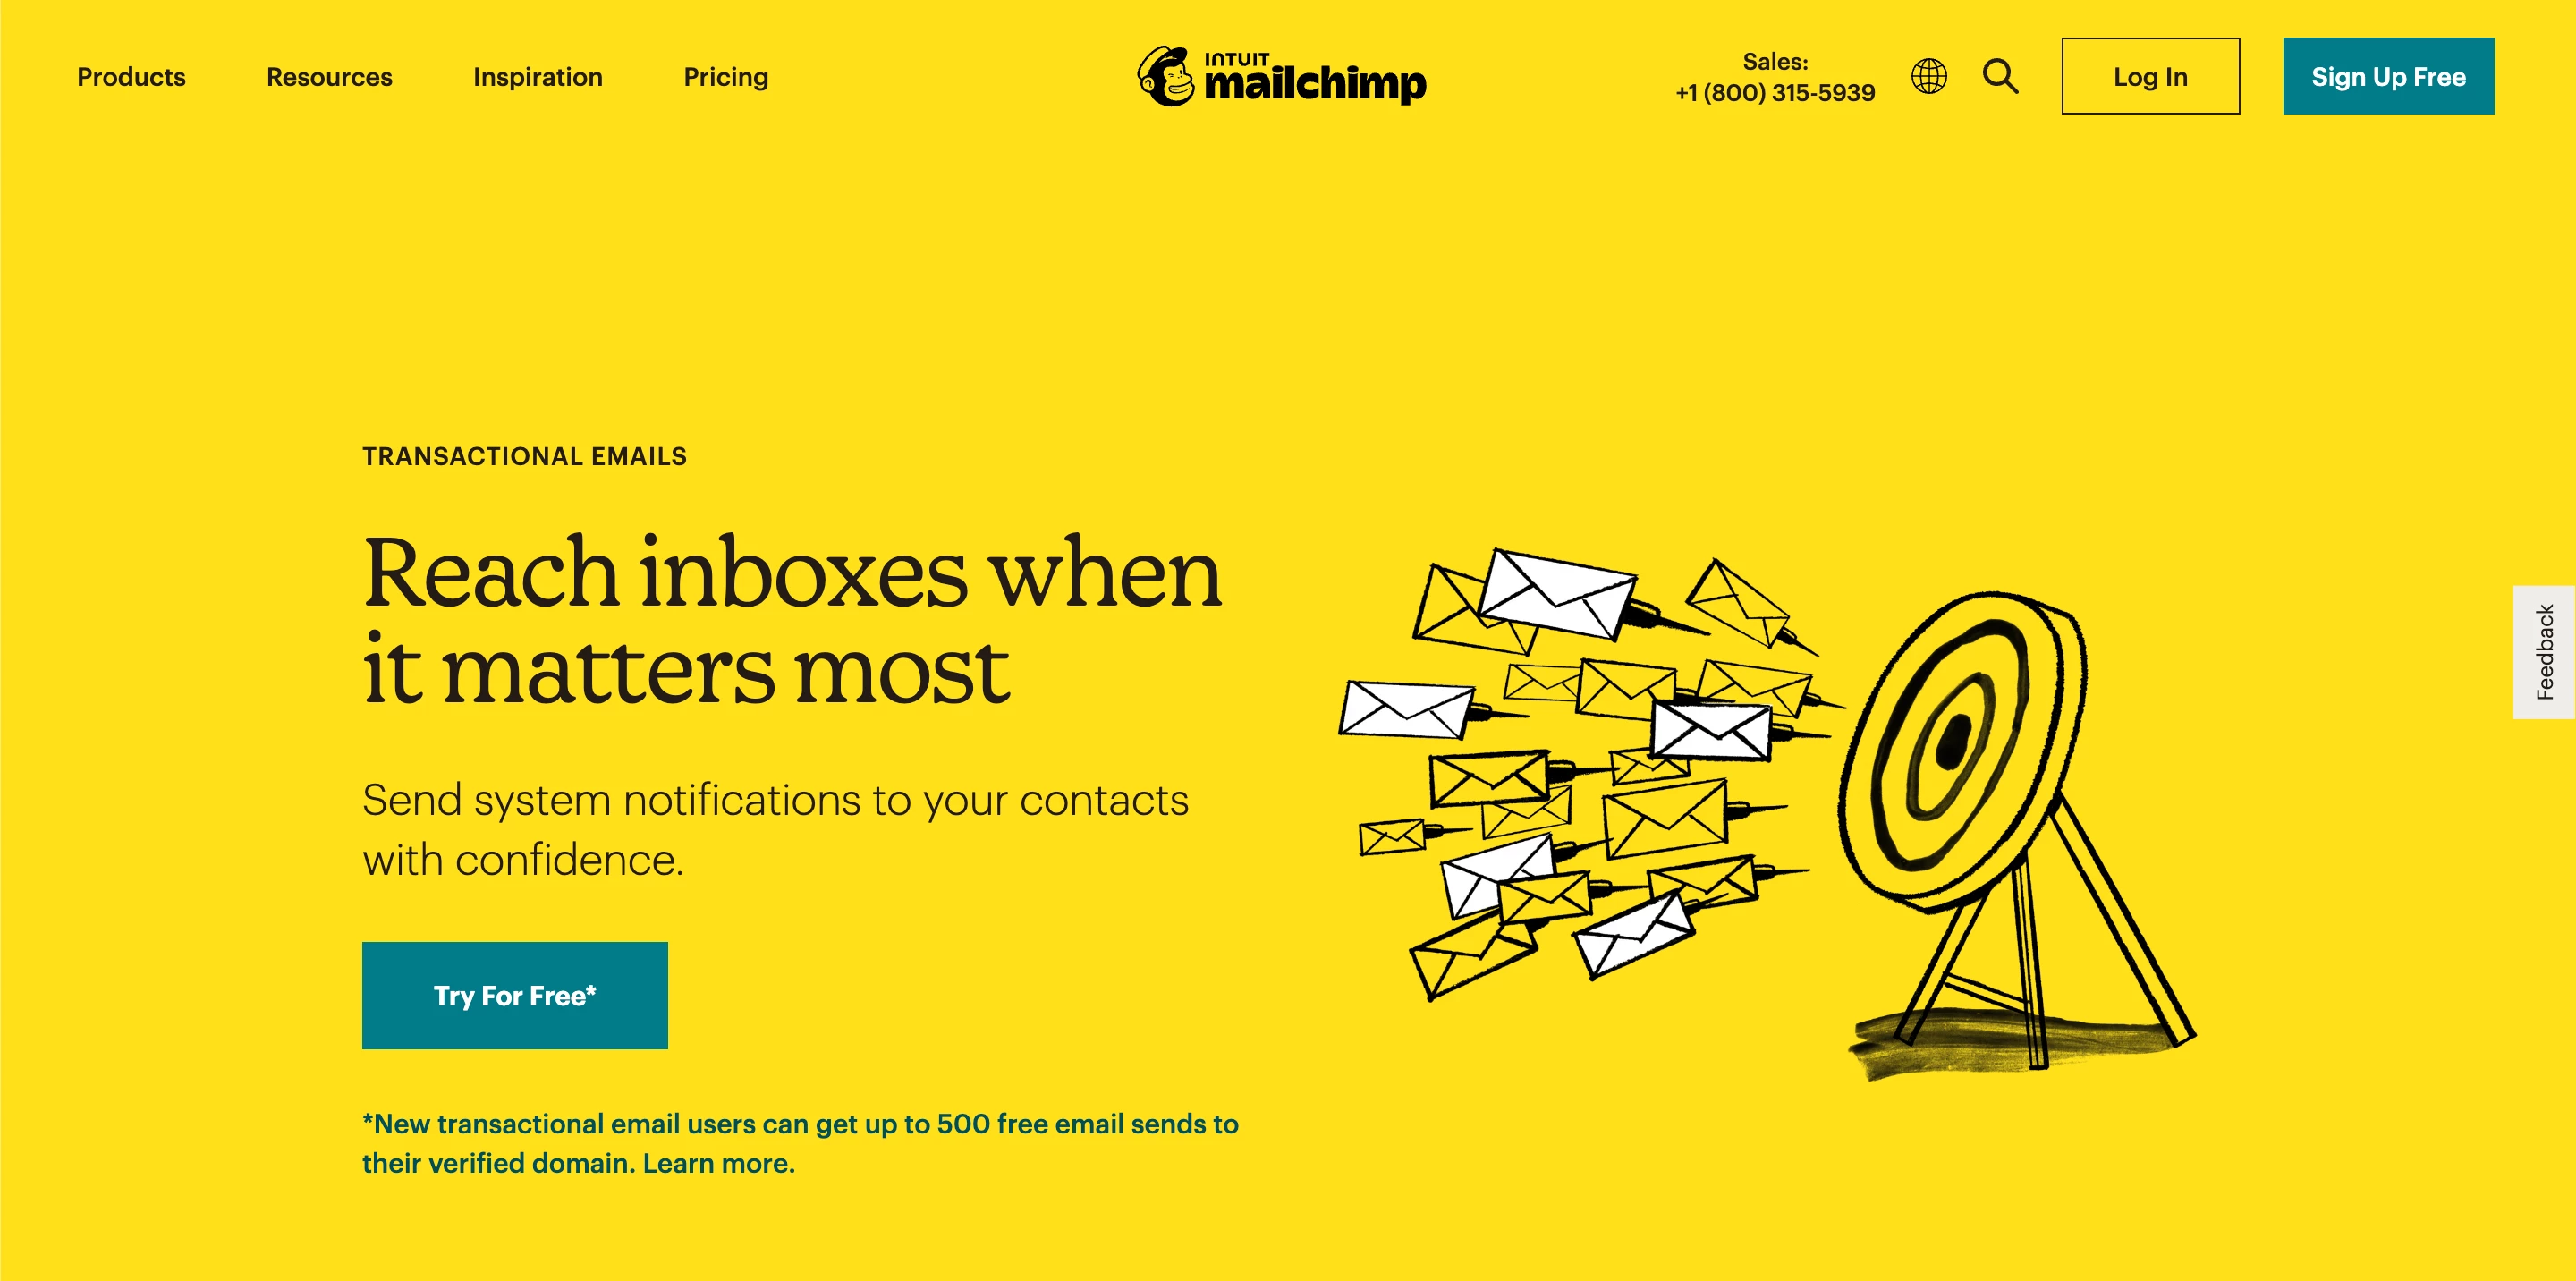 A screenshot of the Mailchimp Transactional Email webpage.